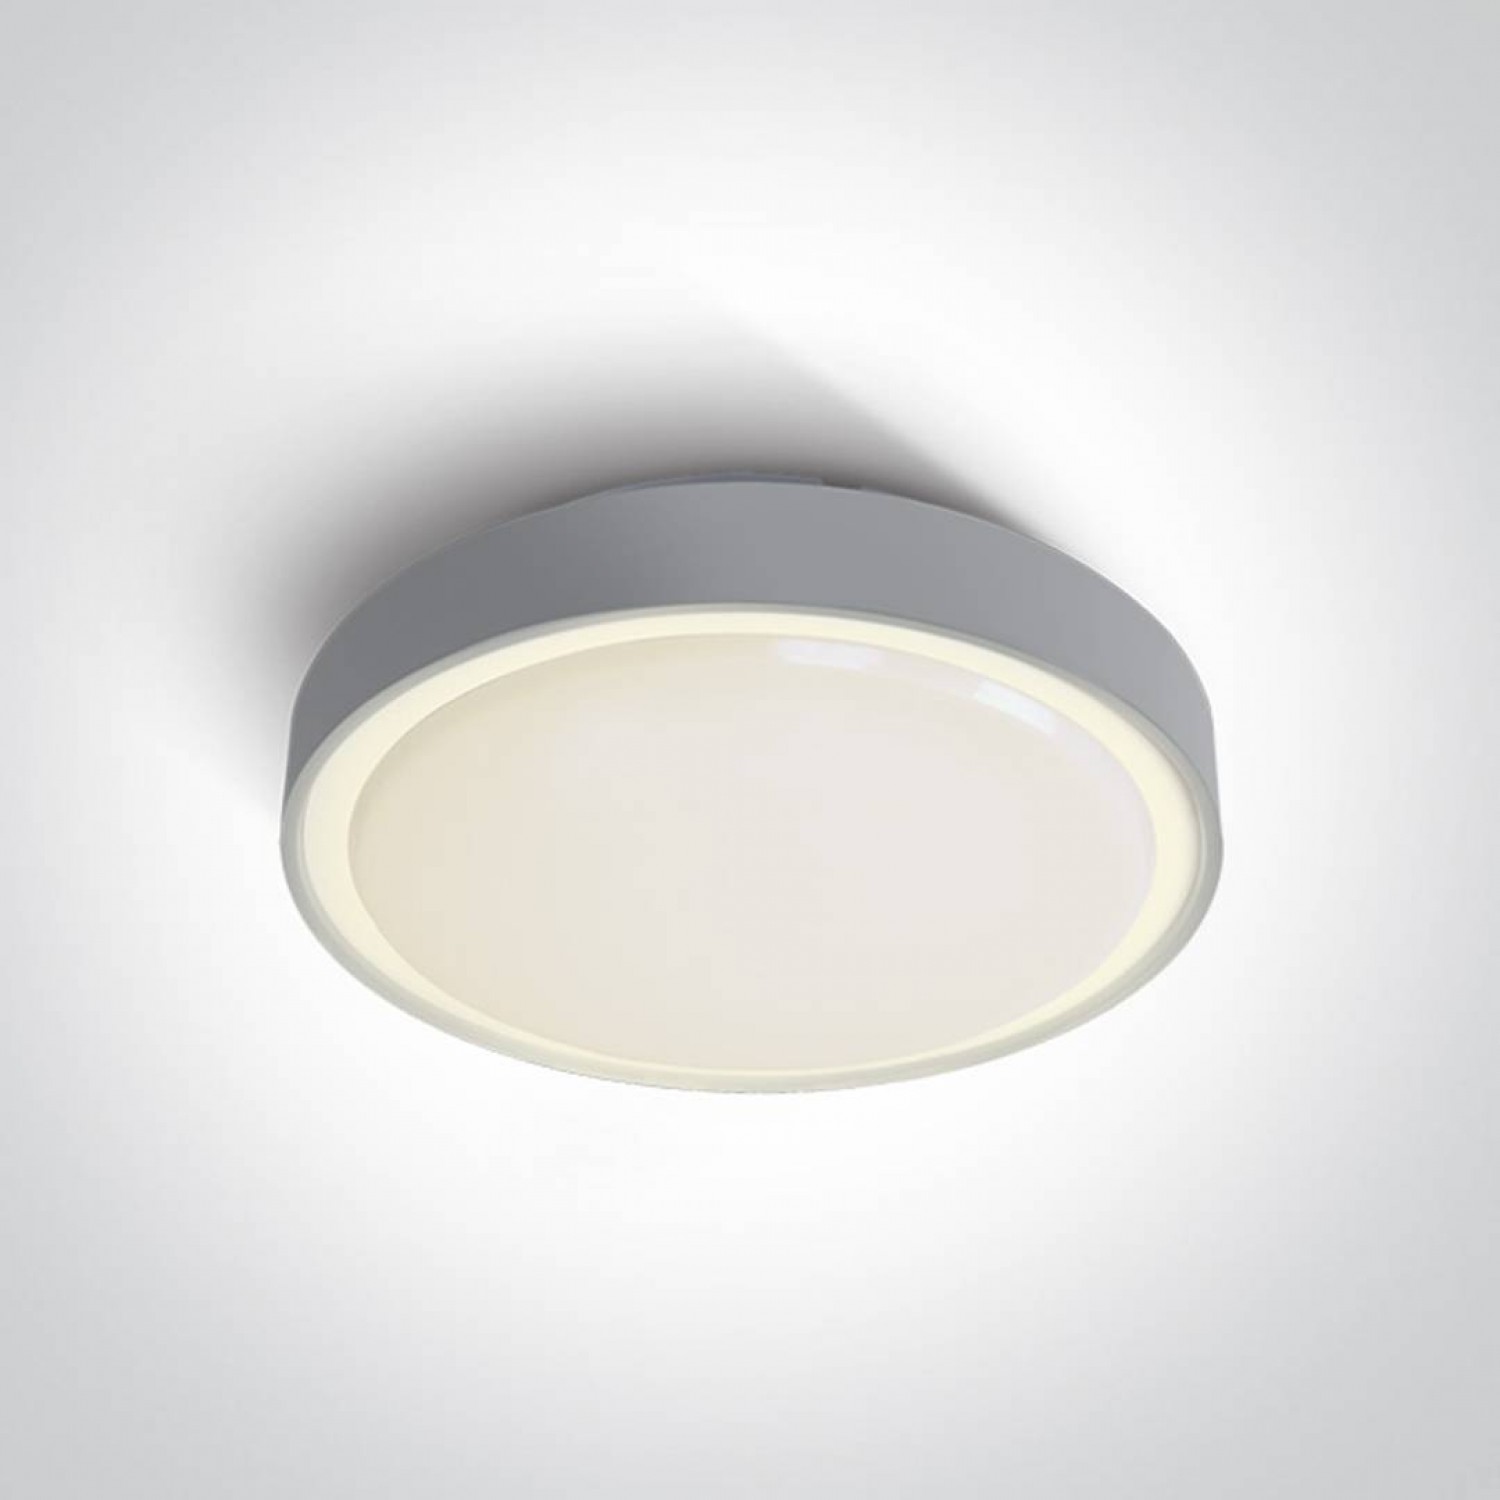 alt_image Світильник ONE Light The LED Plafo Outdoor Round 67280BN/G/W